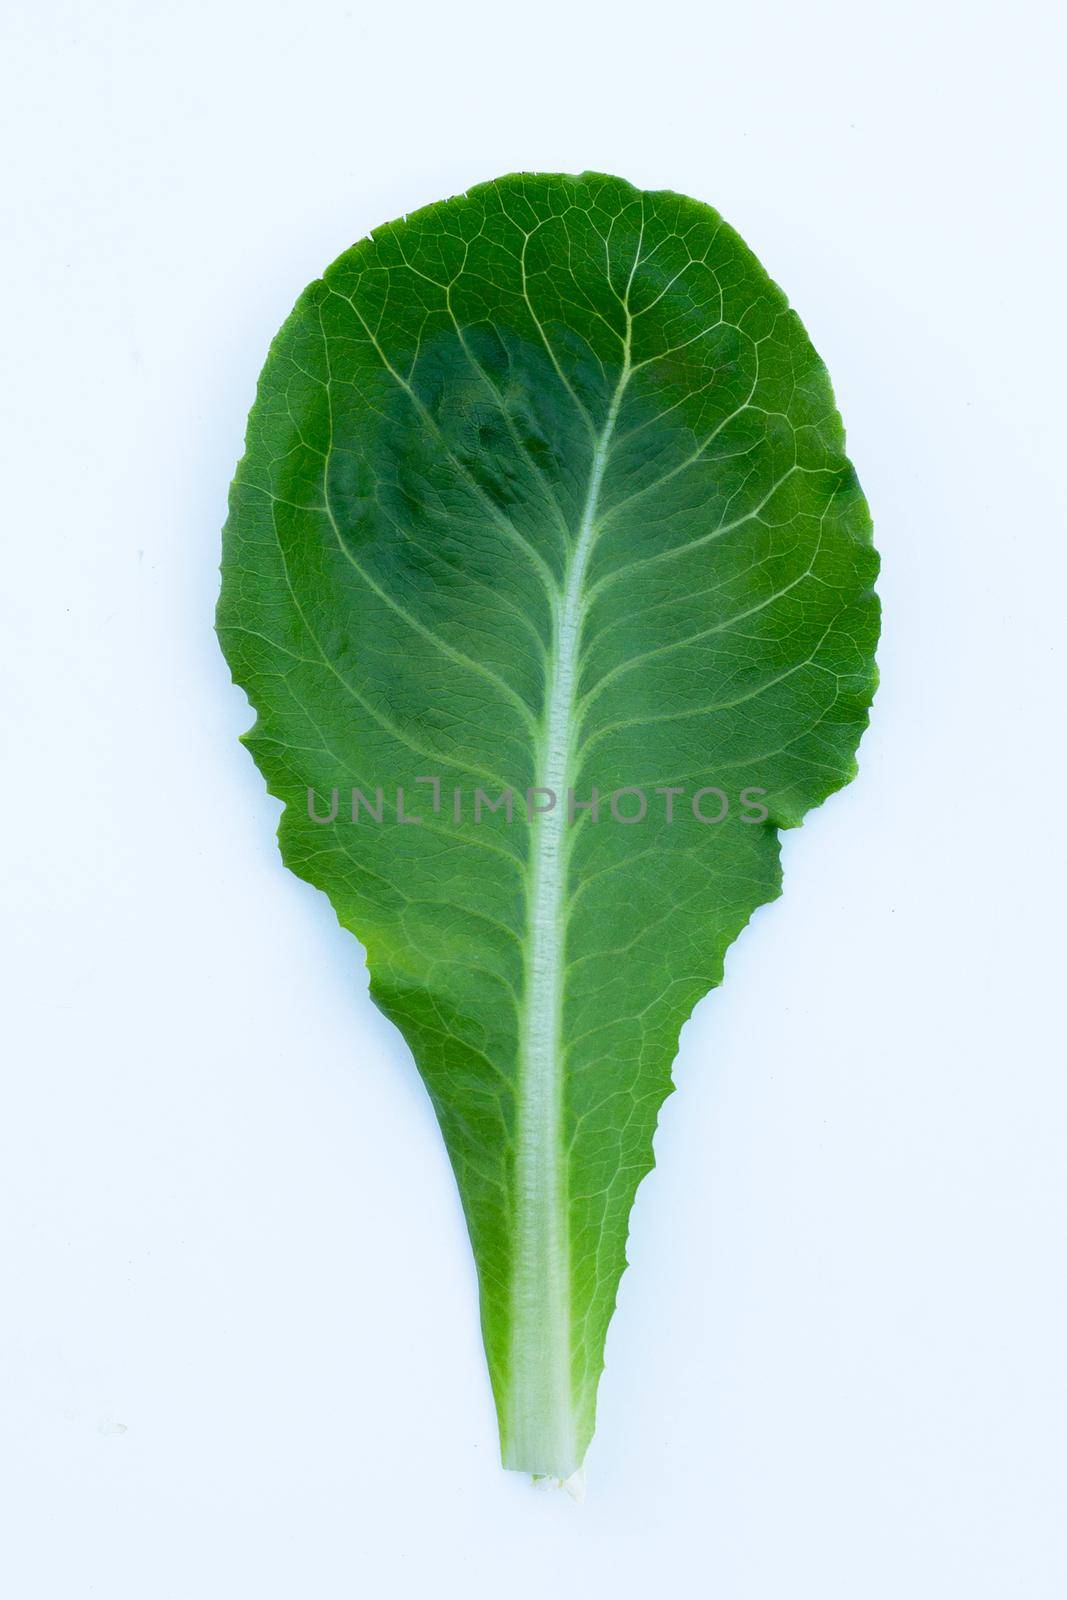 Lettuce leaf on white background. Top view by Bowonpat